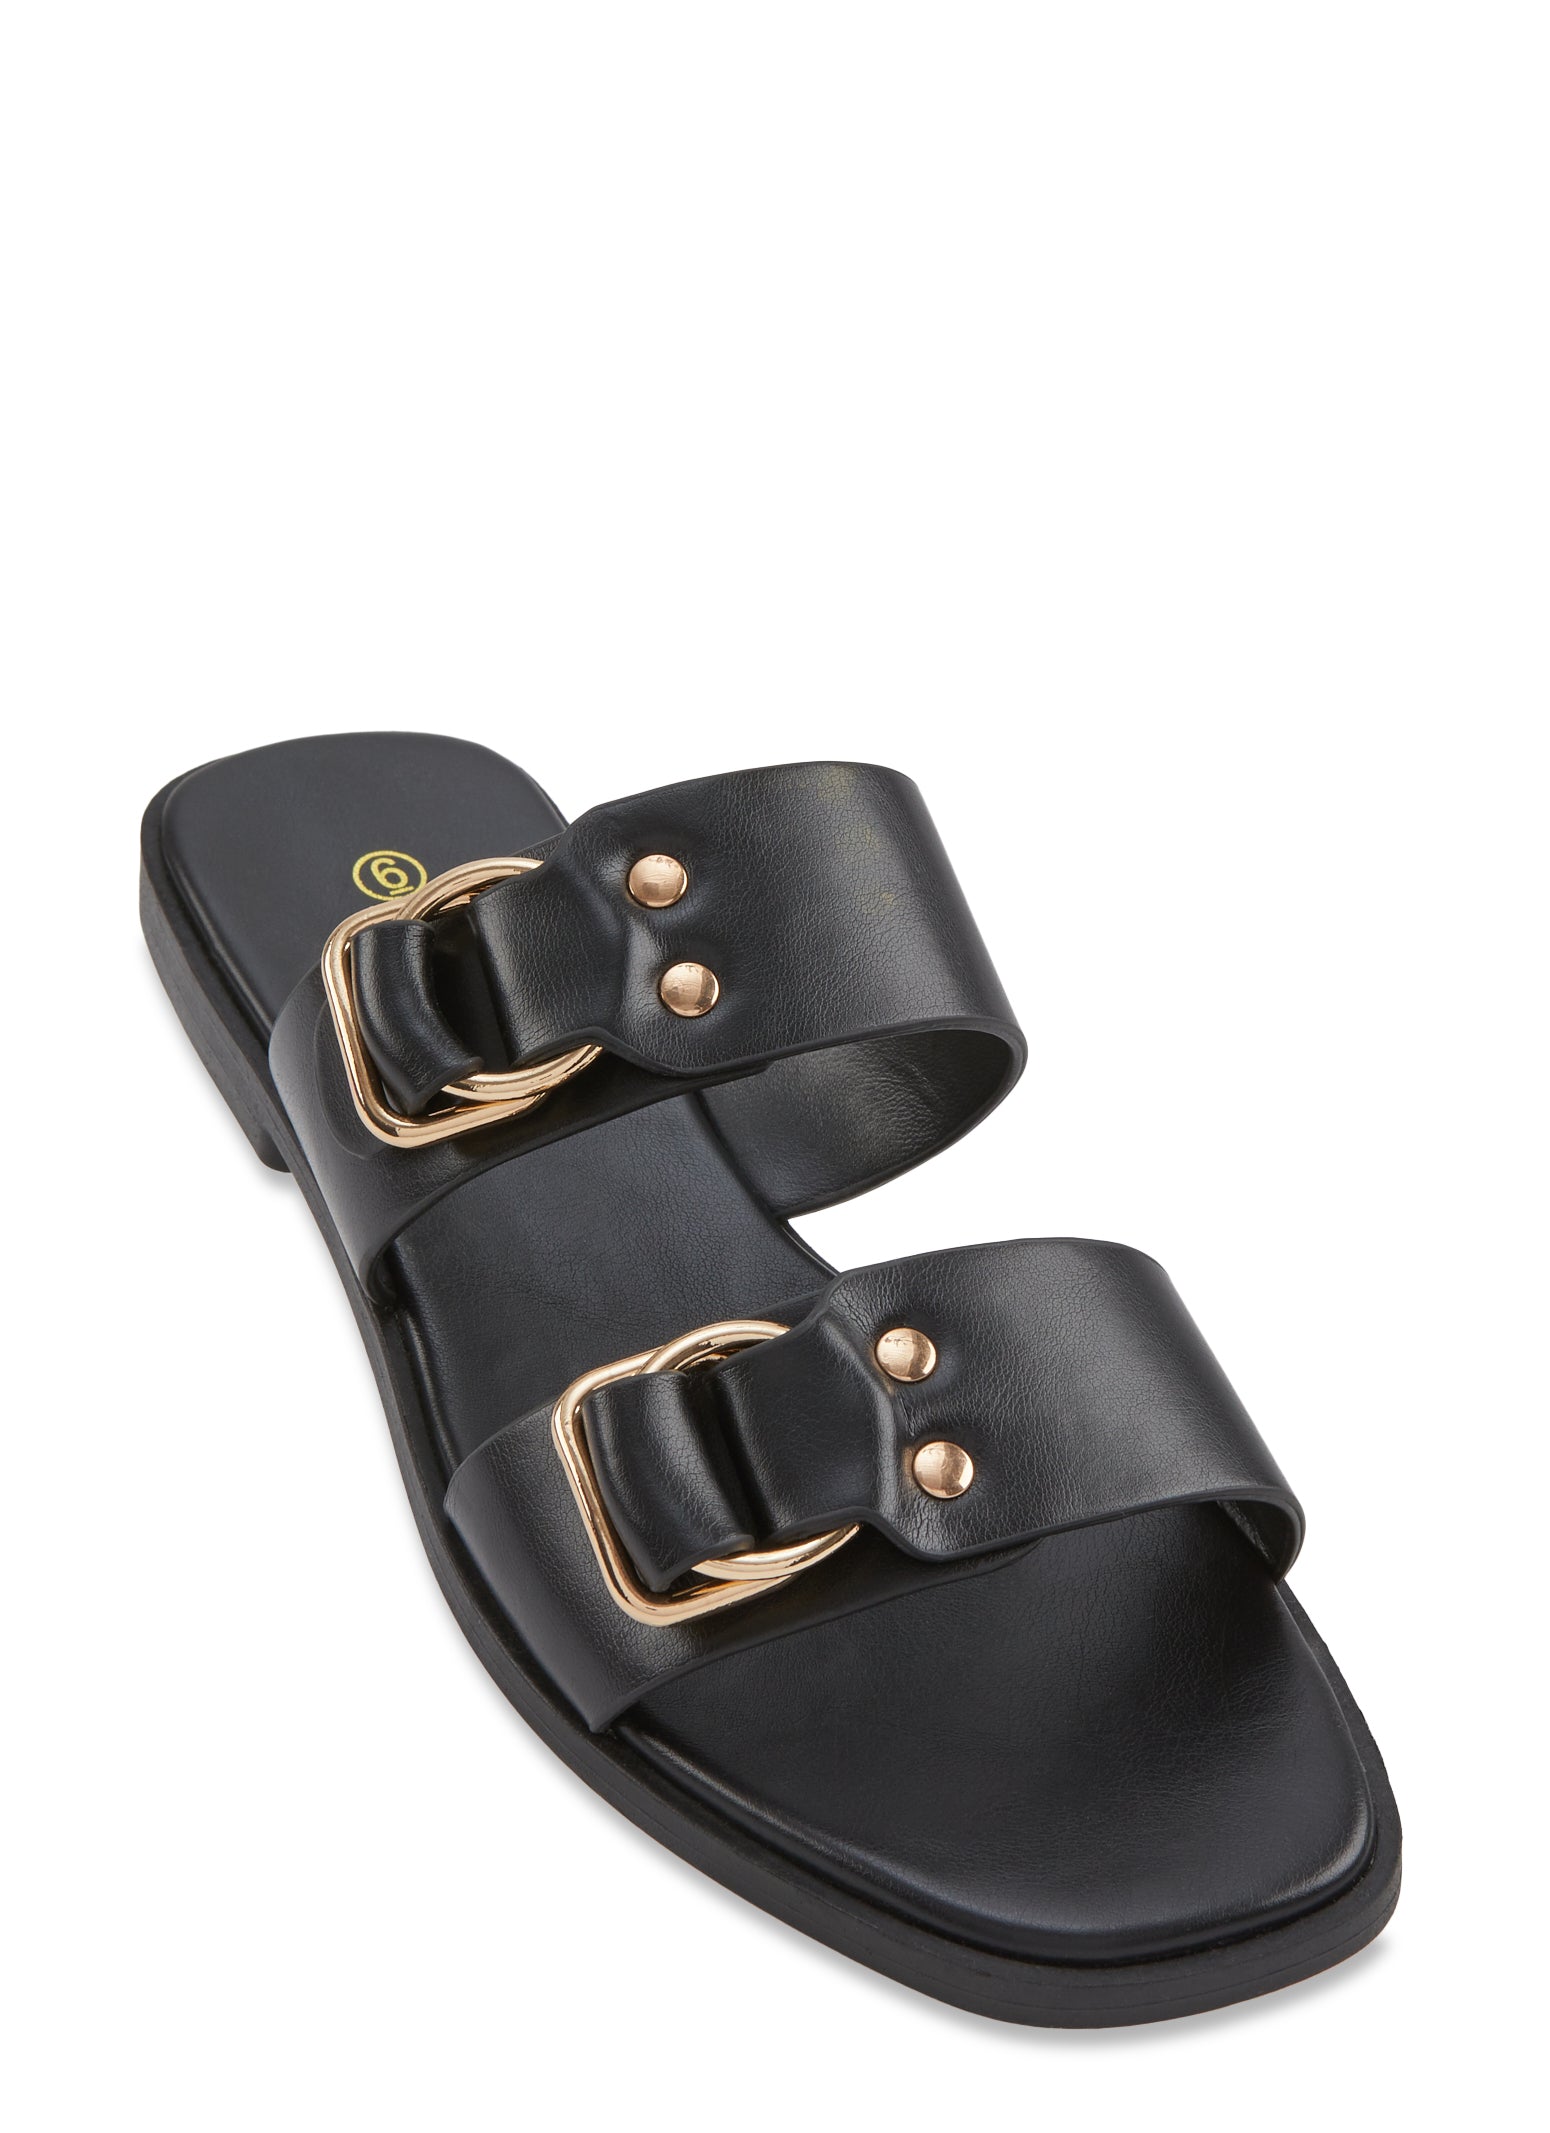 Womens Double Buckle Band Slide Sandals,